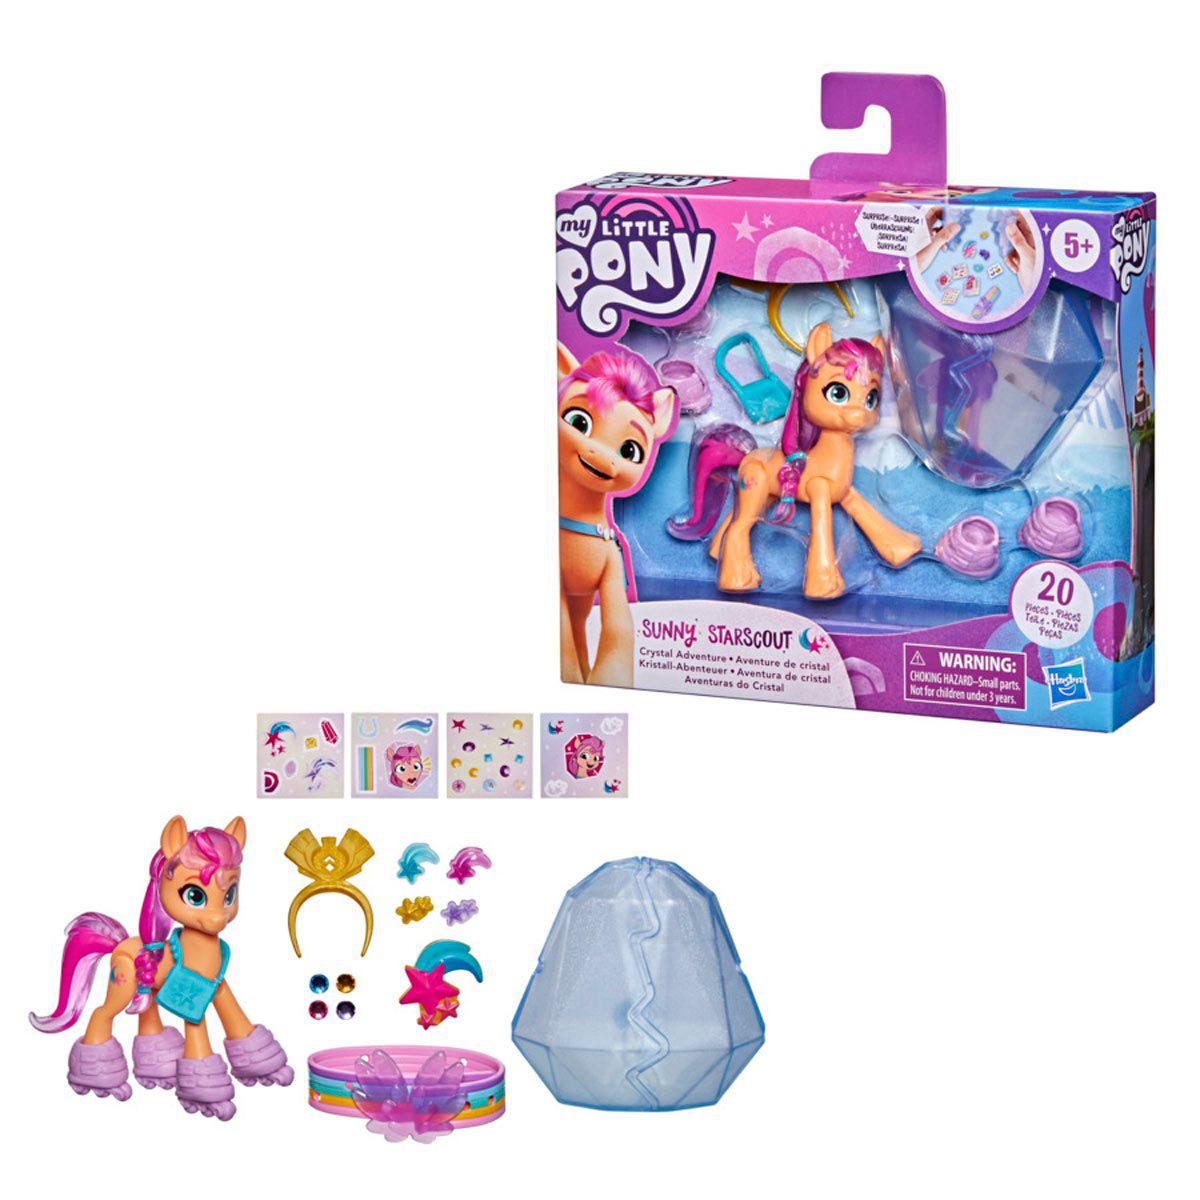 Hasbro-My Little Pony: A New Generation Crystal Adventure - Sunny Starscout-F2454-Legacy Toys